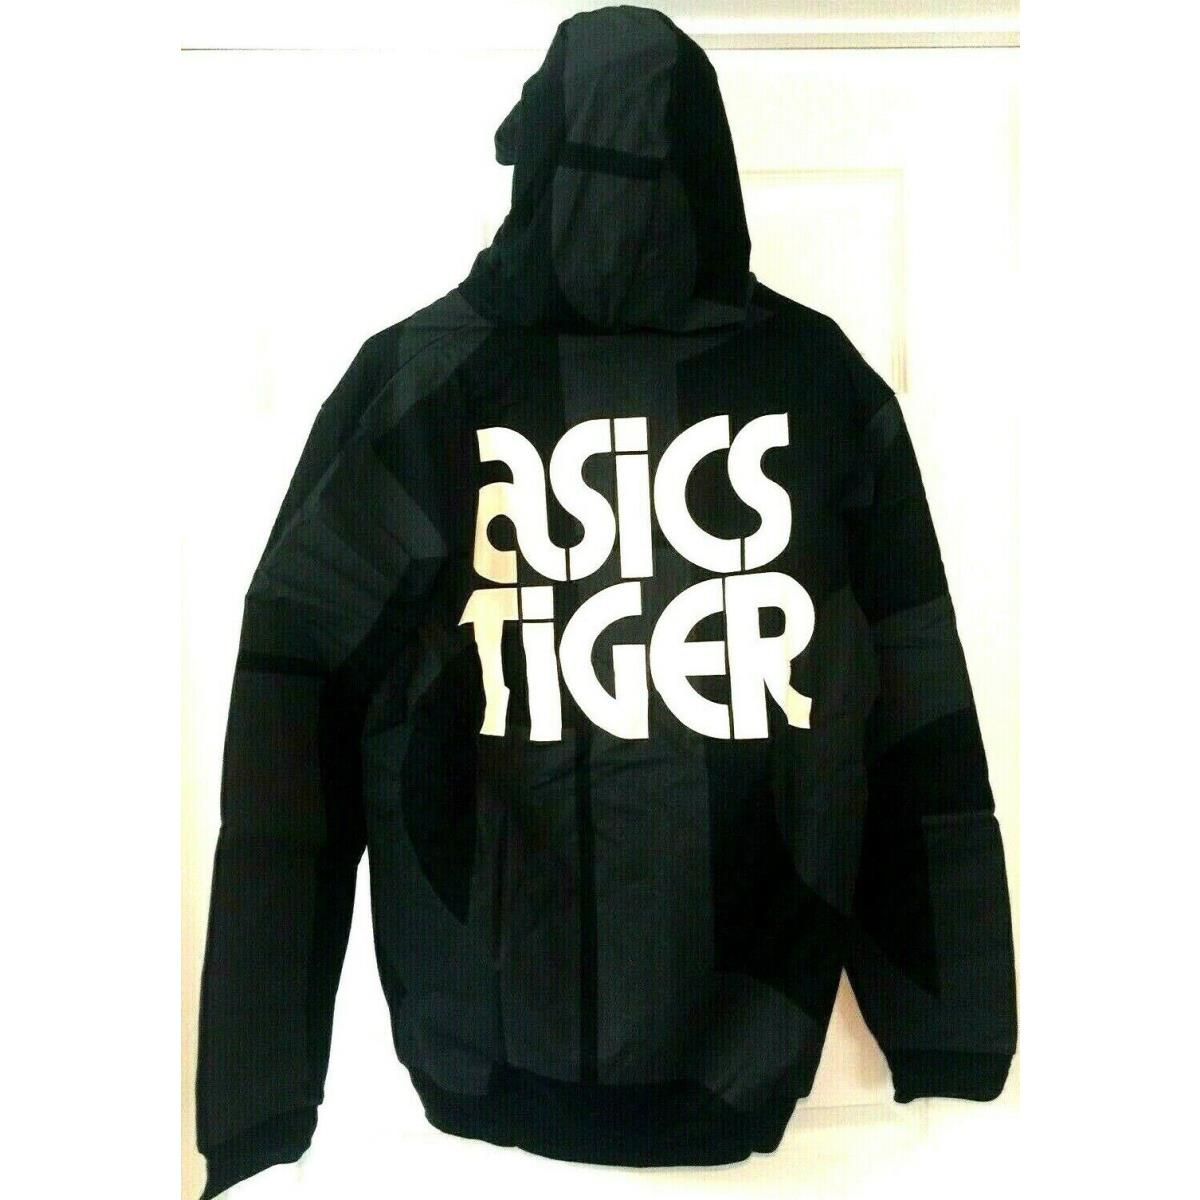 Asics Tiger Aop Padded FZ Hoodie Black Large or Extra Large Full Zipper